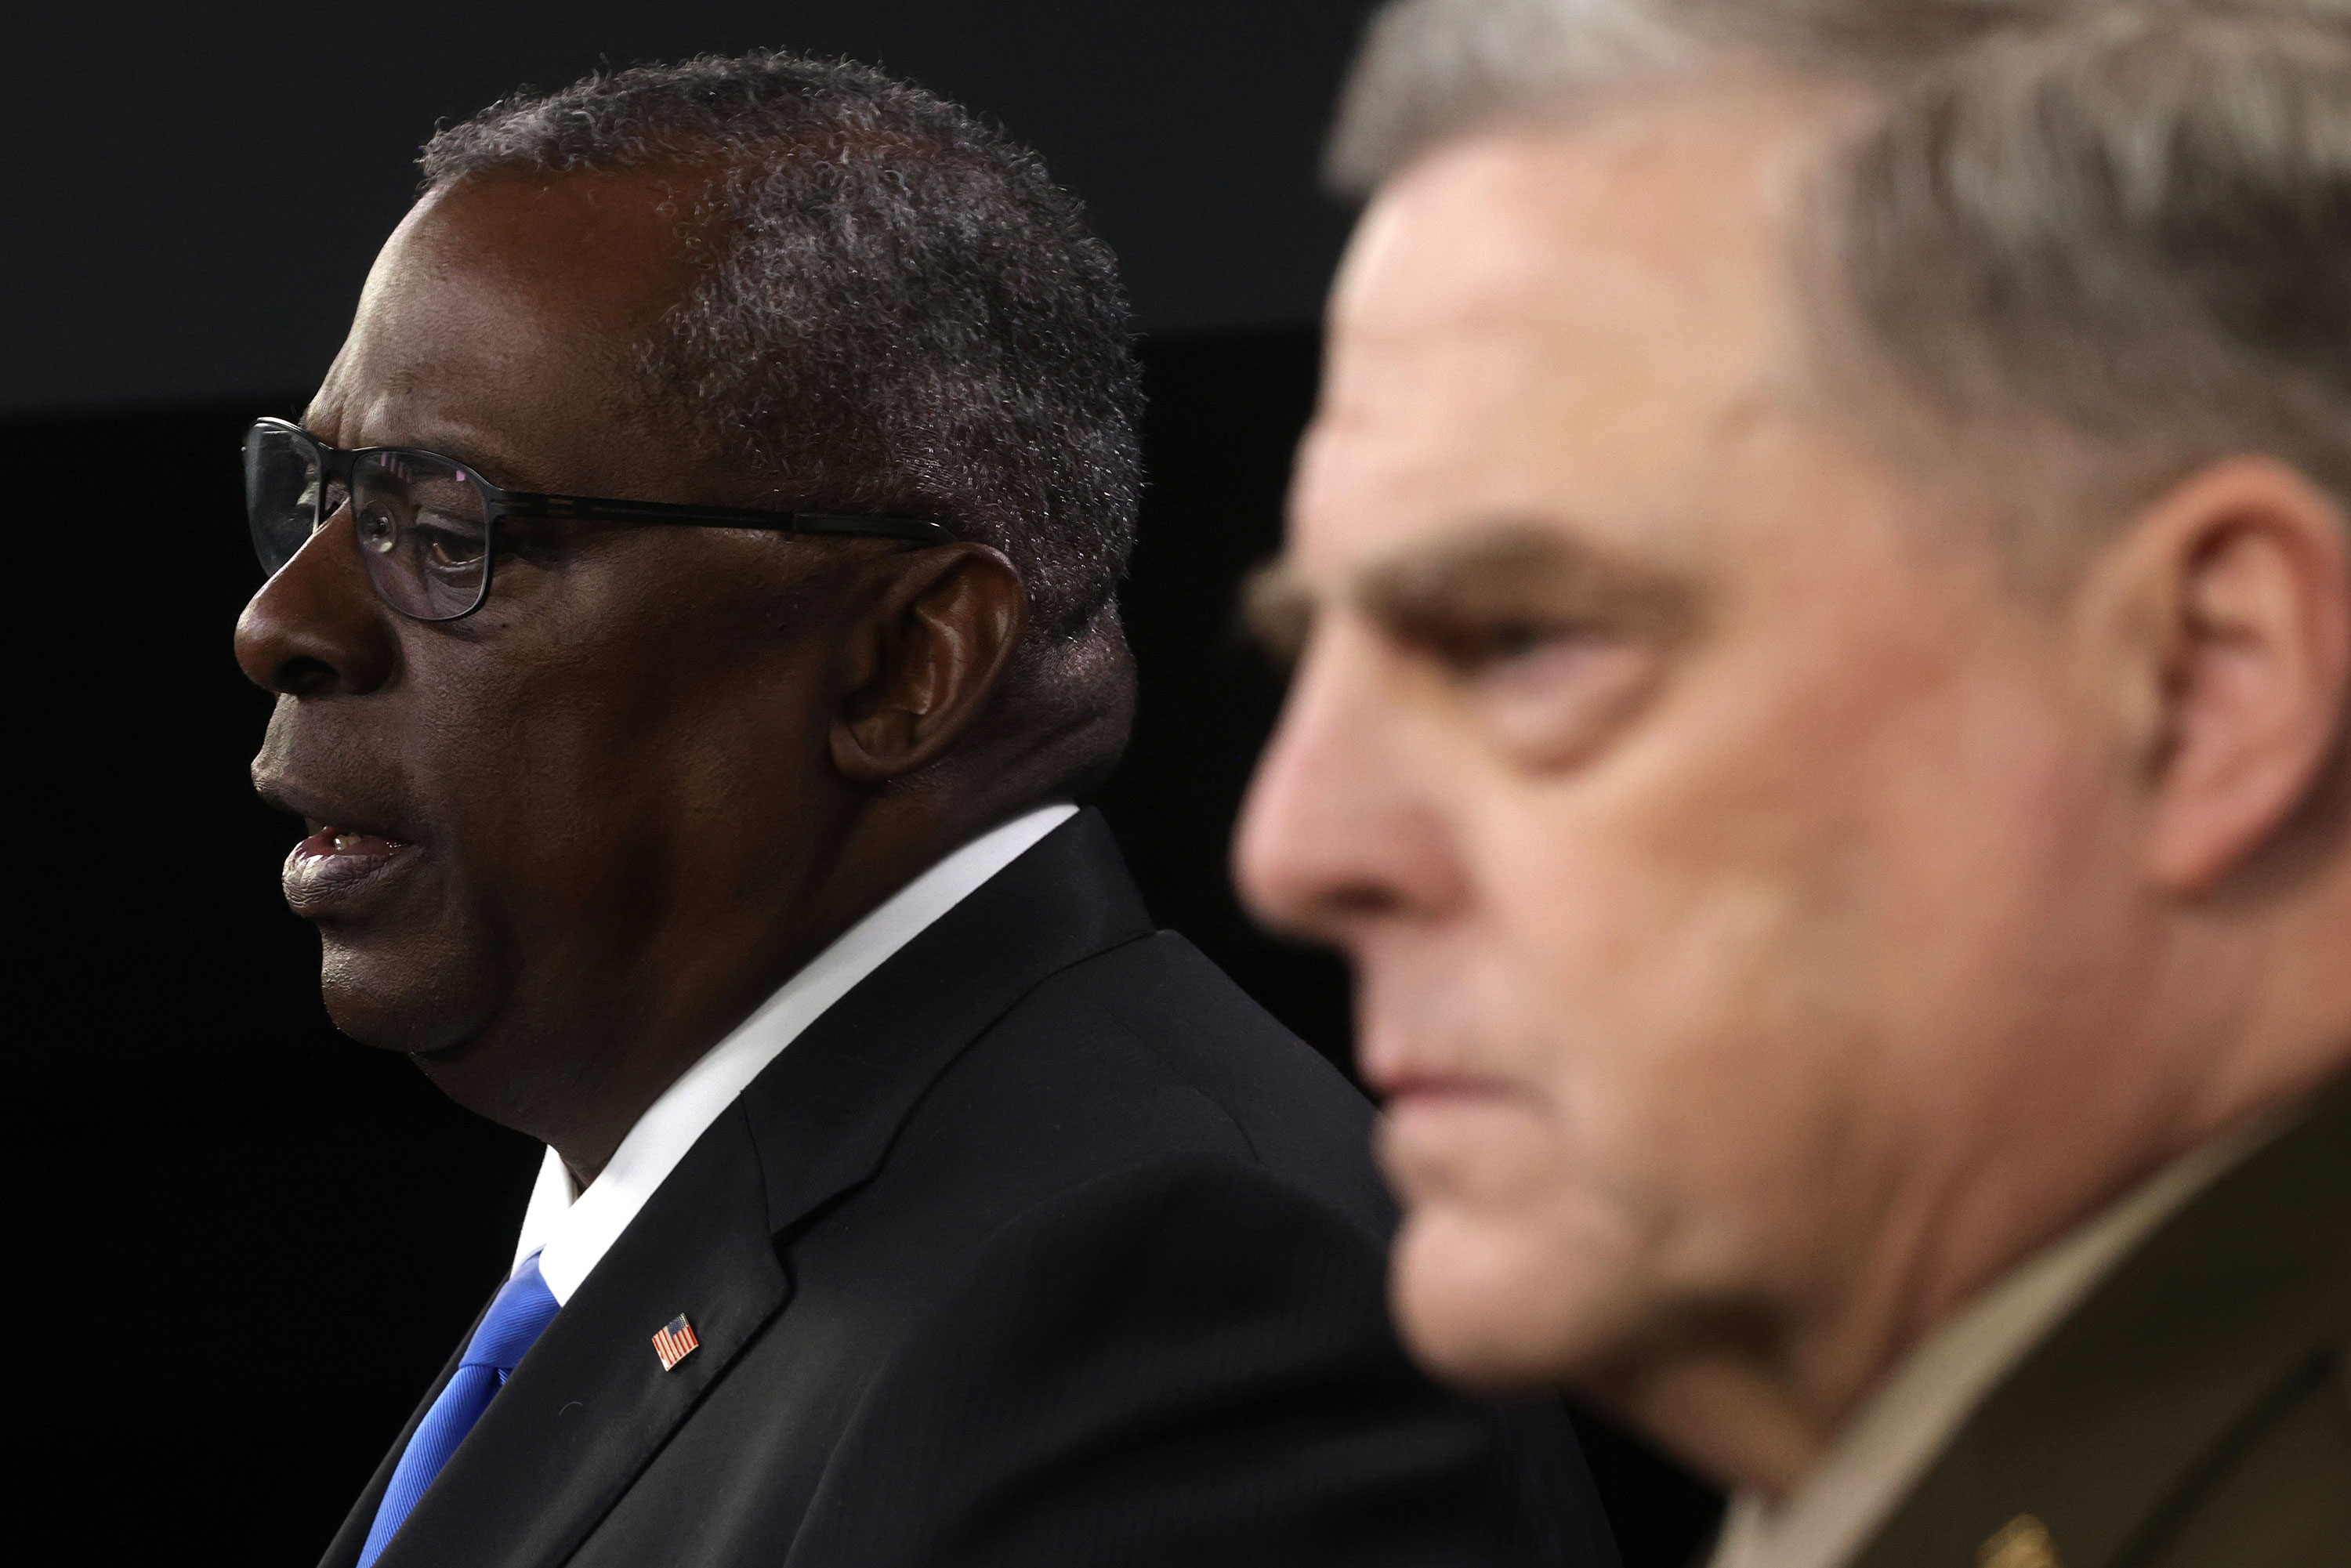 US Secretary of Defense Lloyd Austin speaks alongside Chairman of Joint Chiefs of Staff Gen. Mark Milley at a news briefing at the Pentagon on July 21.